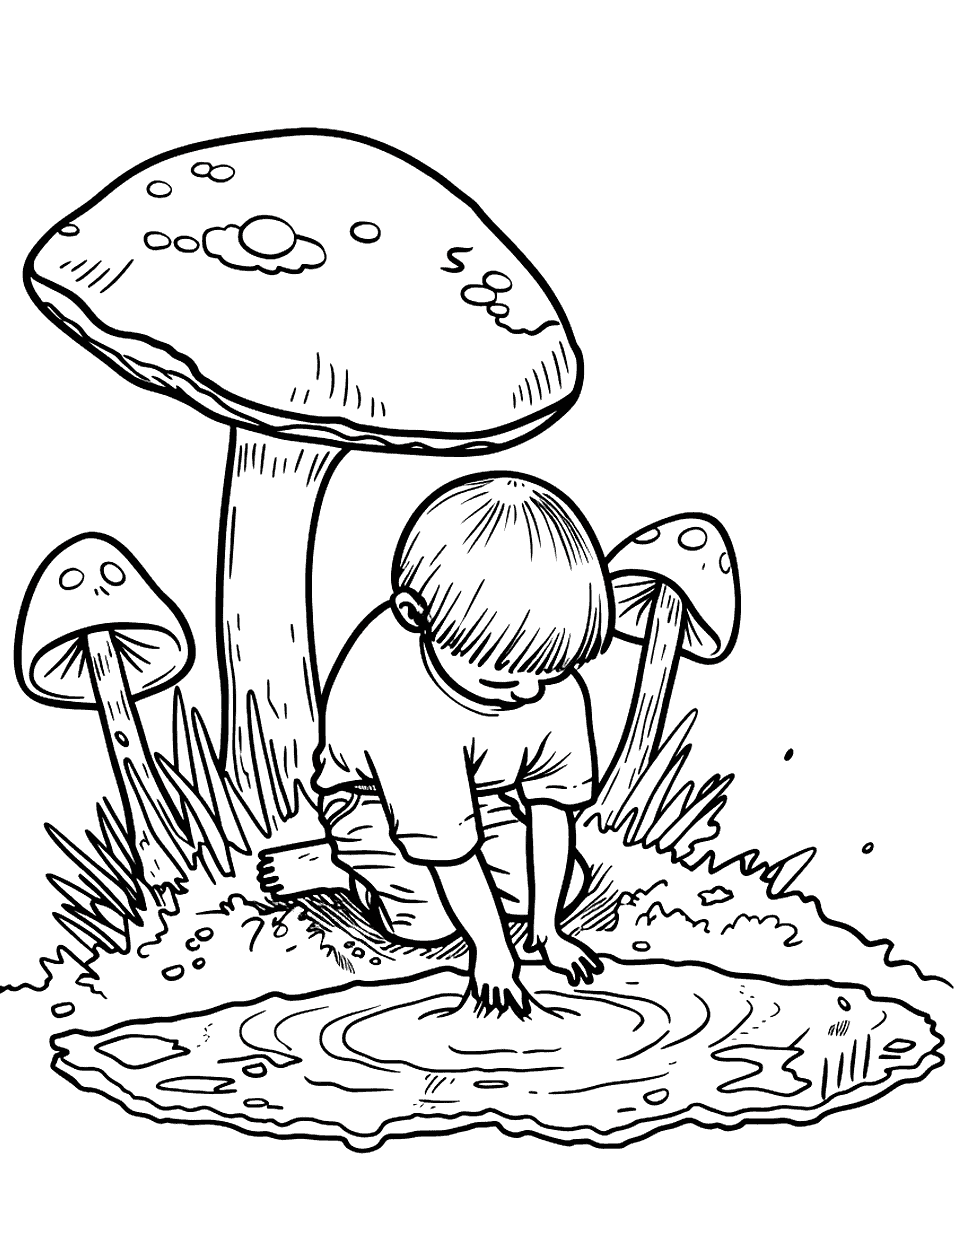 Playing in the Mud Mushroom Coloring Page - A child playing with mud and mushrooms growing nearby.